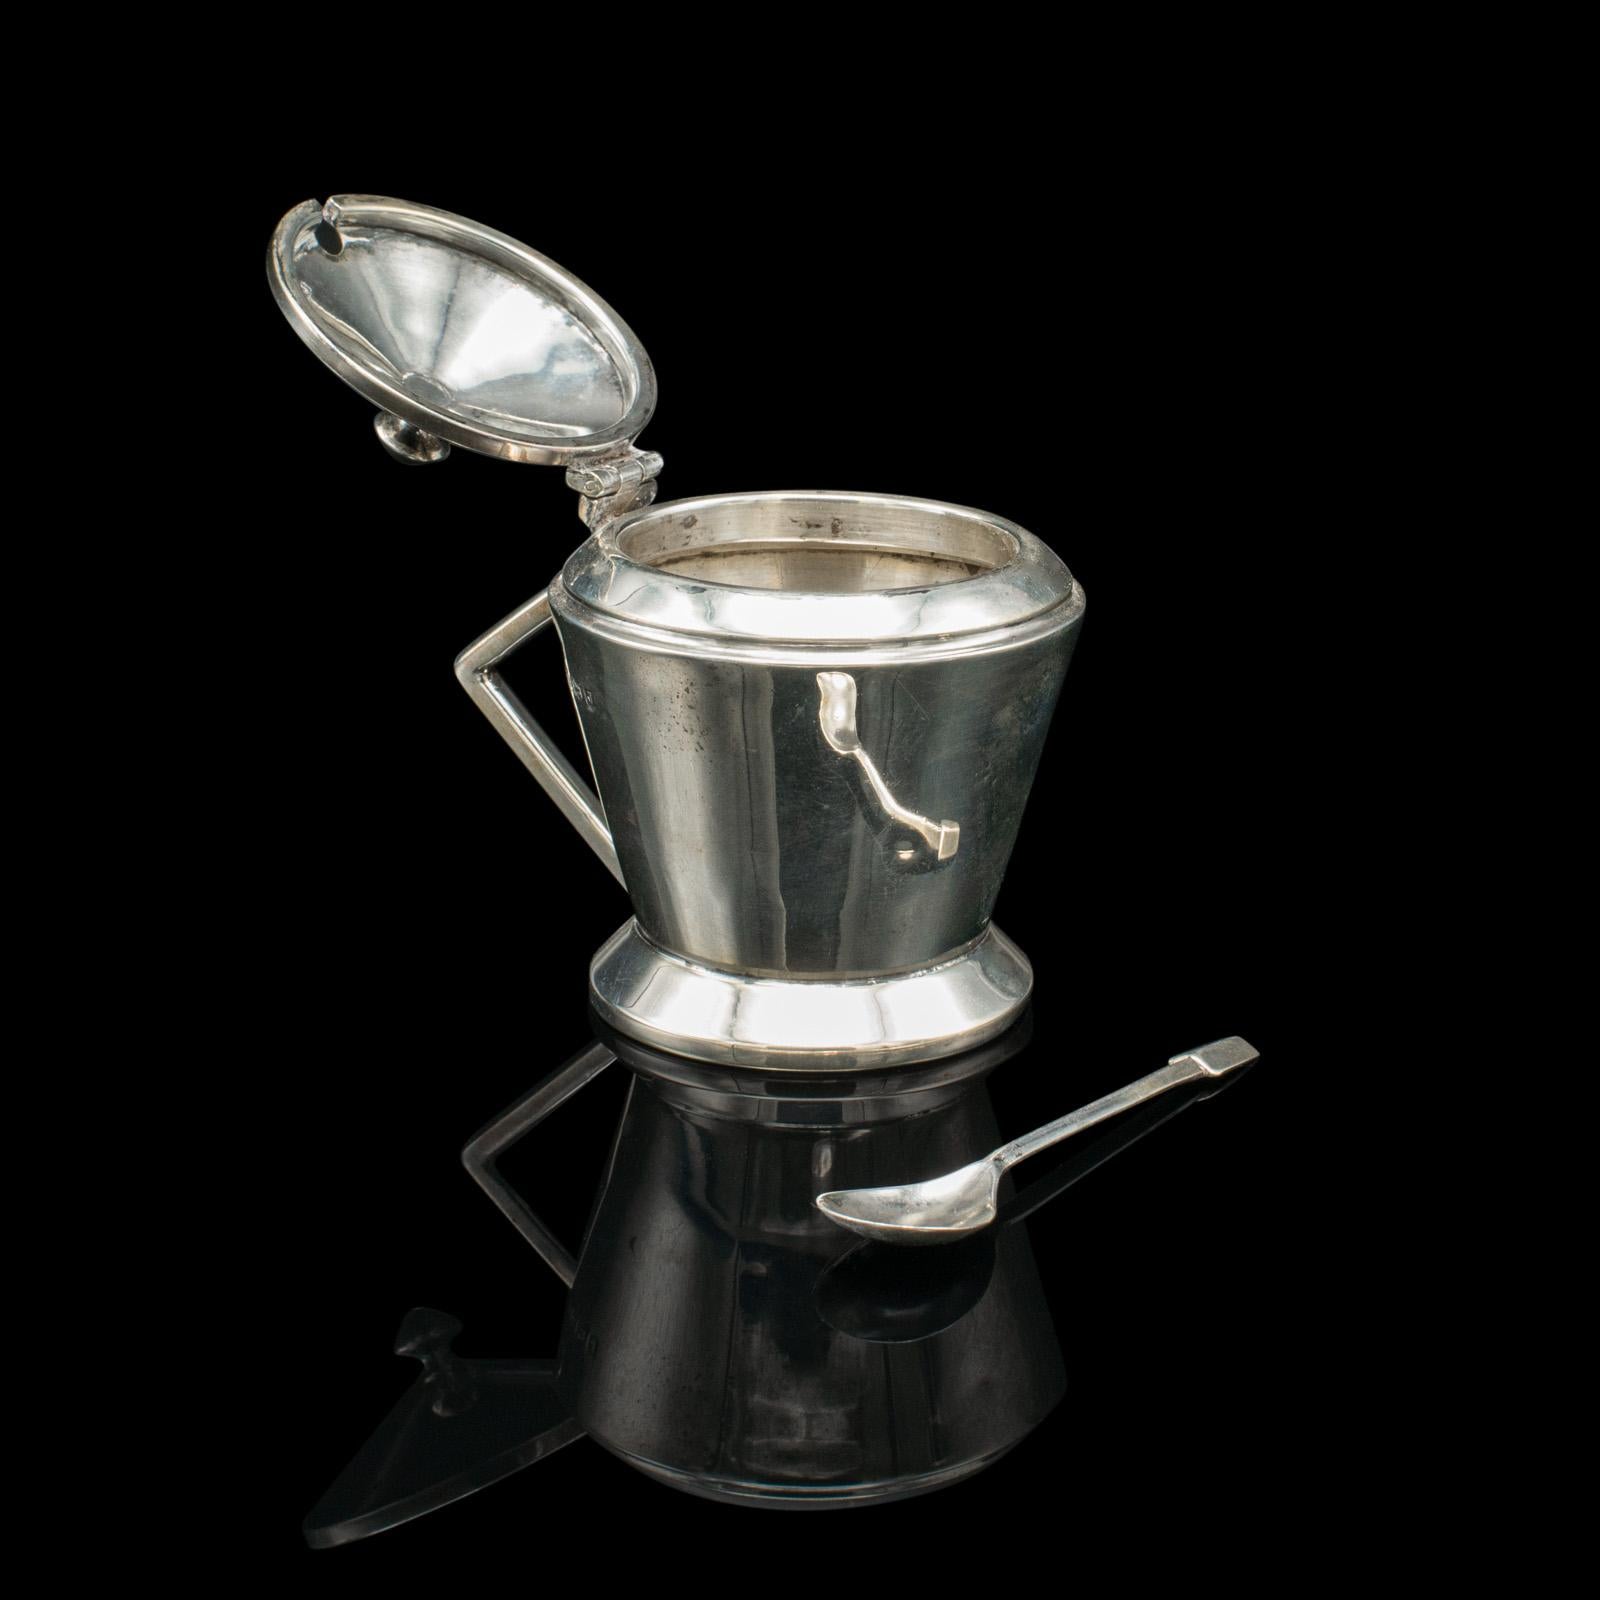 This is a vintage condiment set. An English, Sterling Silver salt & pepper shaker and mustard pot in Art Deco taste, dating to the mid 20th century, hallmarked 1933.

Charming hallmarked tableware with appealing Art Deco forms
Displaying a desirable